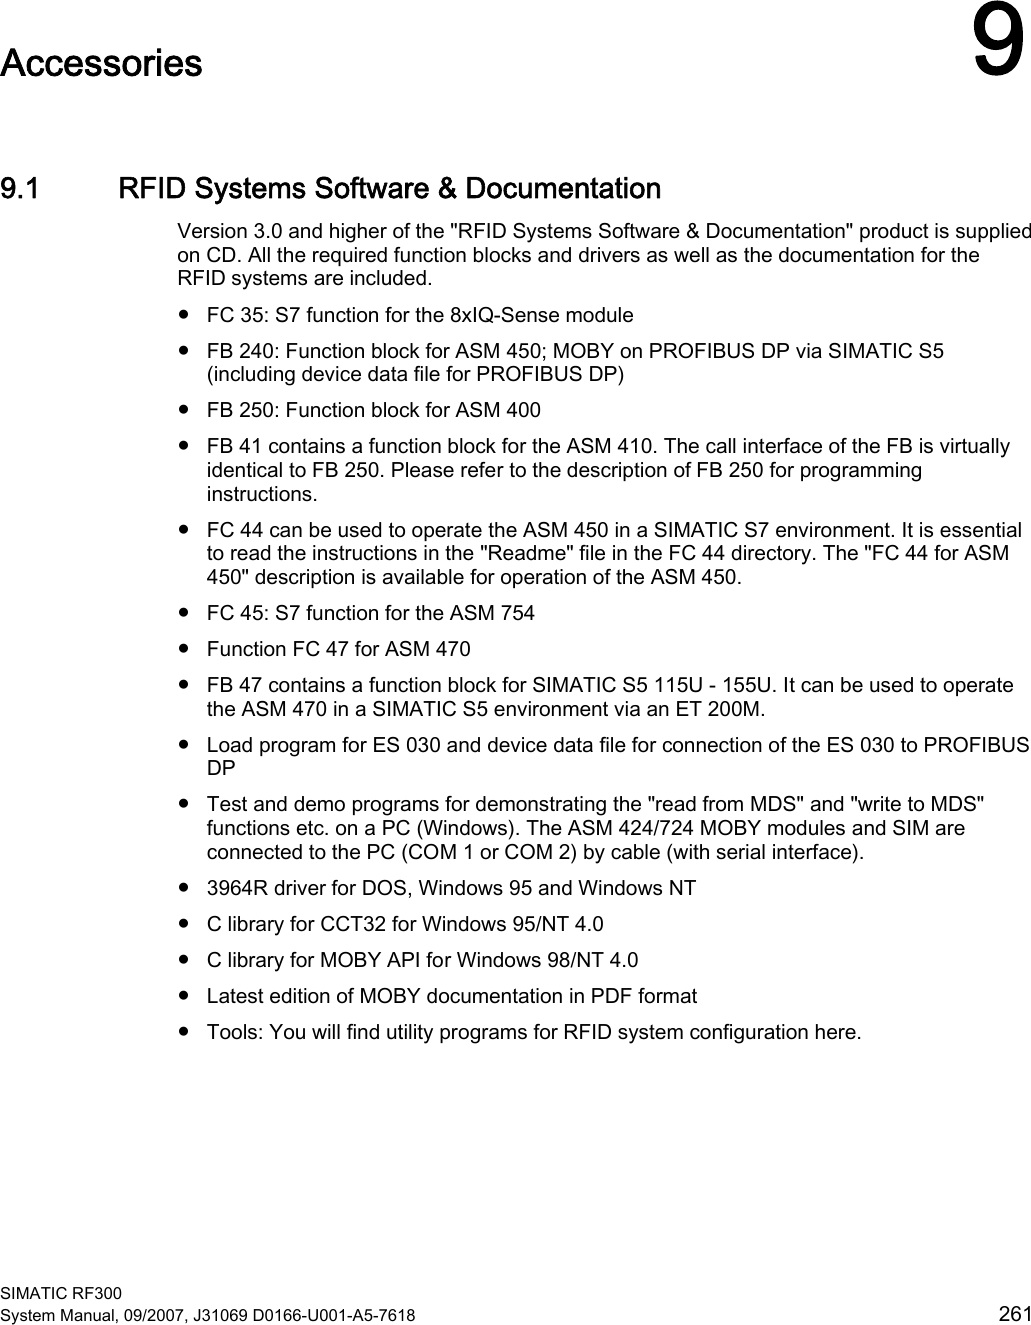  SIMATIC RF300 System Manual, 09/2007, J31069 D0166-U001-A5-7618  261 Accessories  99.1 RFID Systems Software &amp; Documentation Version 3.0 and higher of the &quot;RFID Systems Software &amp; Documentation&quot; product is supplied on CD. All the required function blocks and drivers as well as the documentation for the RFID systems are included.  ●  FC 35: S7 function for the 8xIQ-Sense module ●  FB 240: Function block for ASM 450; MOBY on PROFIBUS DP via SIMATIC S5 (including device data file for PROFIBUS DP) ●  FB 250: Function block for ASM 400 ●  FB 41 contains a function block for the ASM 410. The call interface of the FB is virtually identical to FB 250. Please refer to the description of FB 250 for programming instructions. ●  FC 44 can be used to operate the ASM 450 in a SIMATIC S7 environment. It is essential to read the instructions in the &quot;Readme&quot; file in the FC 44 directory. The &quot;FC 44 for ASM 450&quot; description is available for operation of the ASM 450. ●  FC 45: S7 function for the ASM 754 ●  Function FC 47 for ASM 470 ●  FB 47 contains a function block for SIMATIC S5 115U - 155U. It can be used to operate the ASM 470 in a SIMATIC S5 environment via an ET 200M. ●  Load program for ES 030 and device data file for connection of the ES 030 to PROFIBUS DP ●  Test and demo programs for demonstrating the &quot;read from MDS&quot; and &quot;write to MDS&quot; functions etc. on a PC (Windows). The ASM 424/724 MOBY modules and SIM are connected to the PC (COM 1 or COM 2) by cable (with serial interface). ●  3964R driver for DOS, Windows 95 and Windows NT ●  C library for CCT32 for Windows 95/NT 4.0 ●  C library for MOBY API for Windows 98/NT 4.0 ●  Latest edition of MOBY documentation in PDF format ●  Tools: You will find utility programs for RFID system configuration here.  